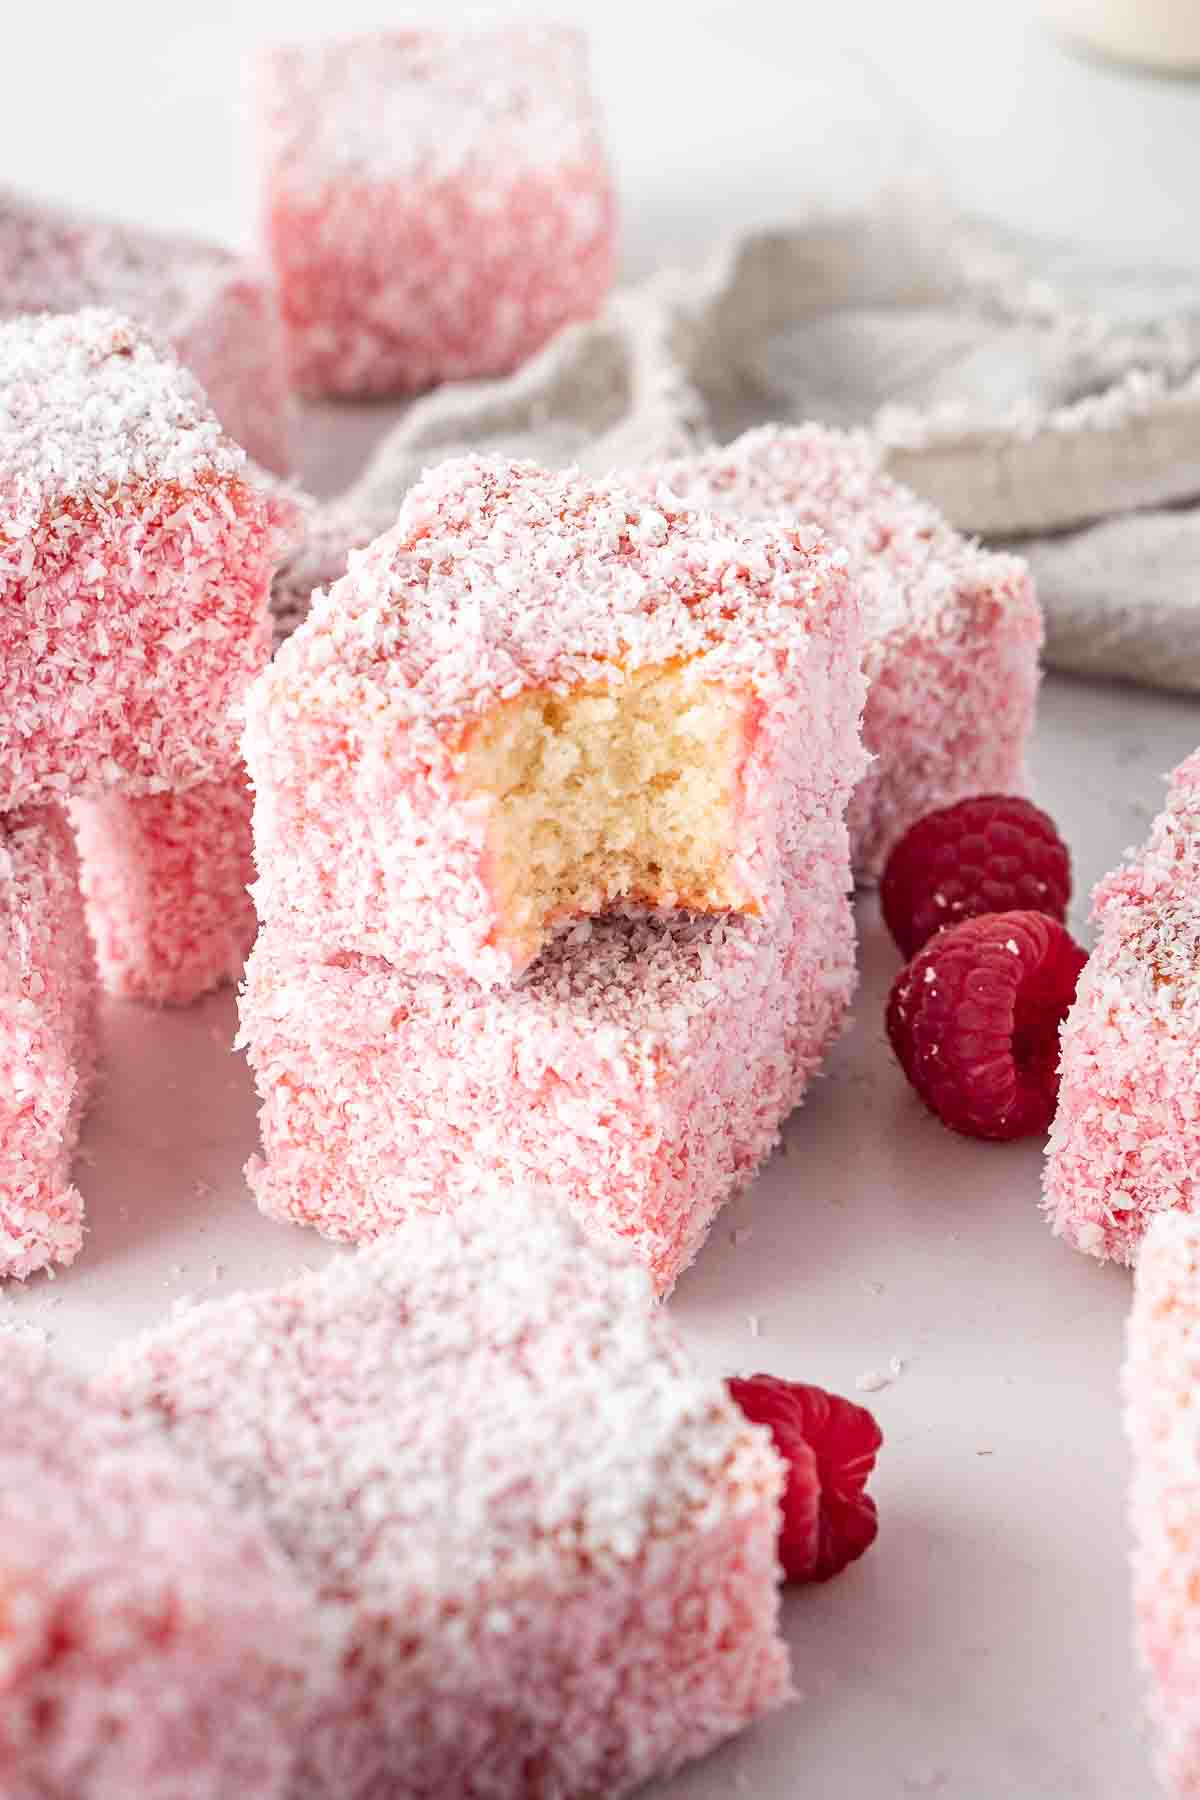 Plain raspberry lamingtons with fresh raspberries and one with a bite taken.